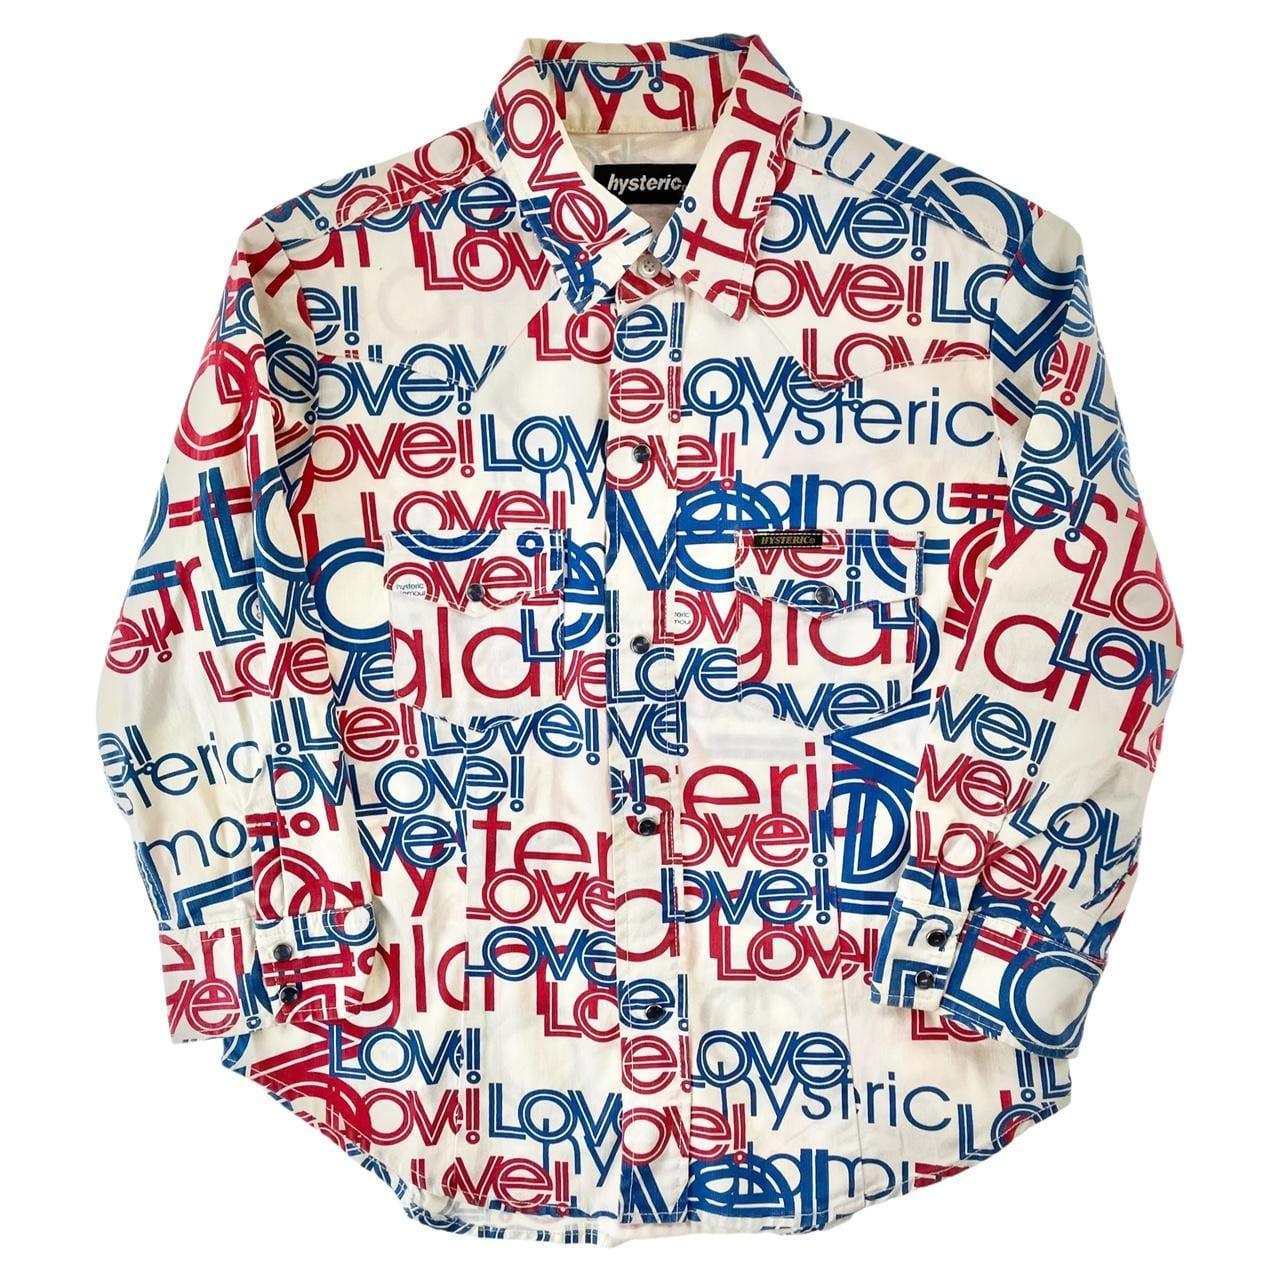 Vintage Hysteric Glamour all over print button shirt woman’s size S - Known Source